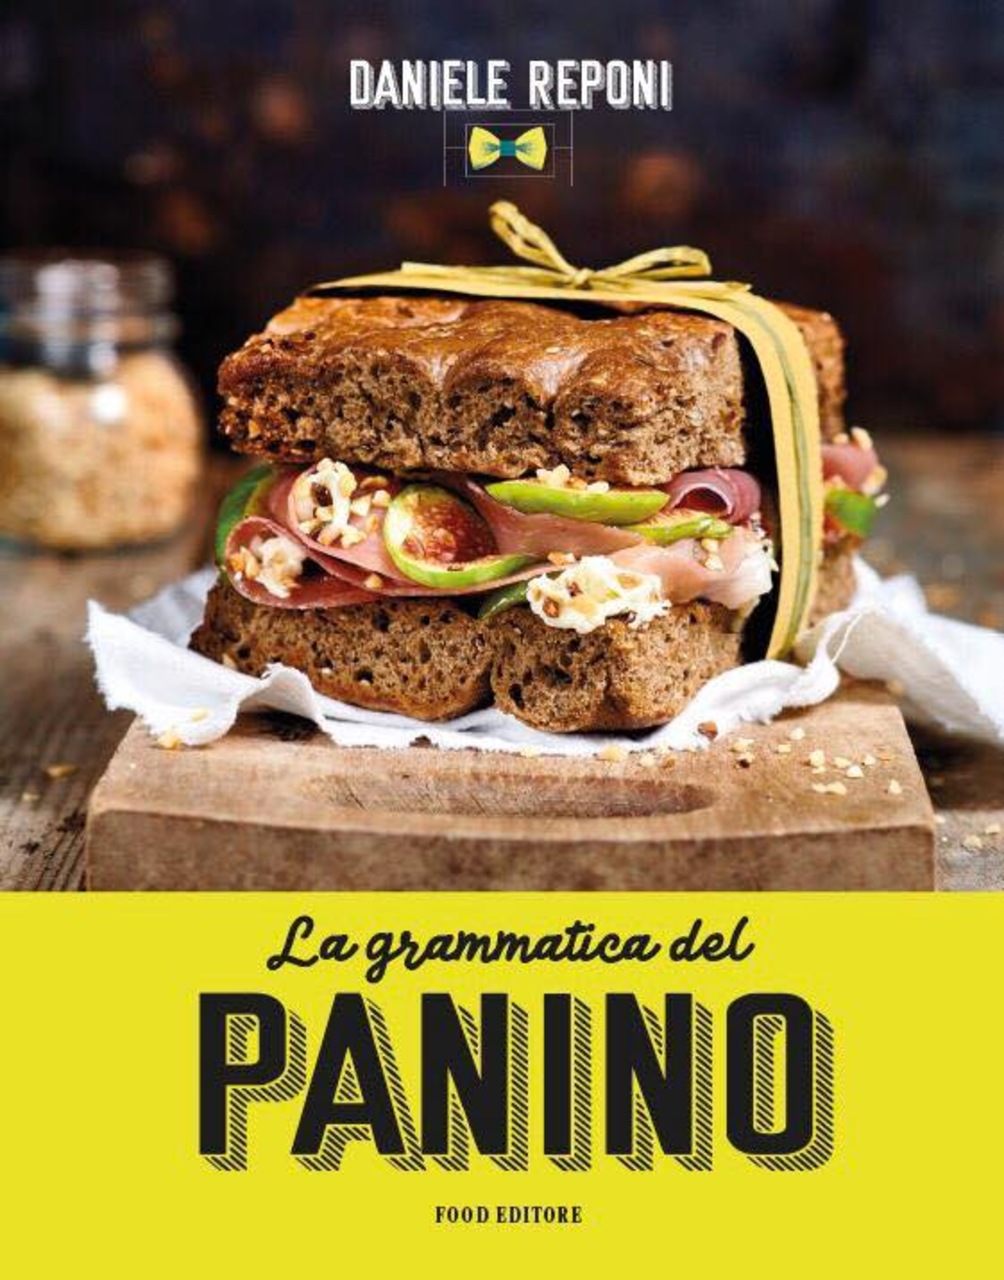 Gourmet sandwich: the cover of the book "The grammar of the sandwich" by Daniele Reponi